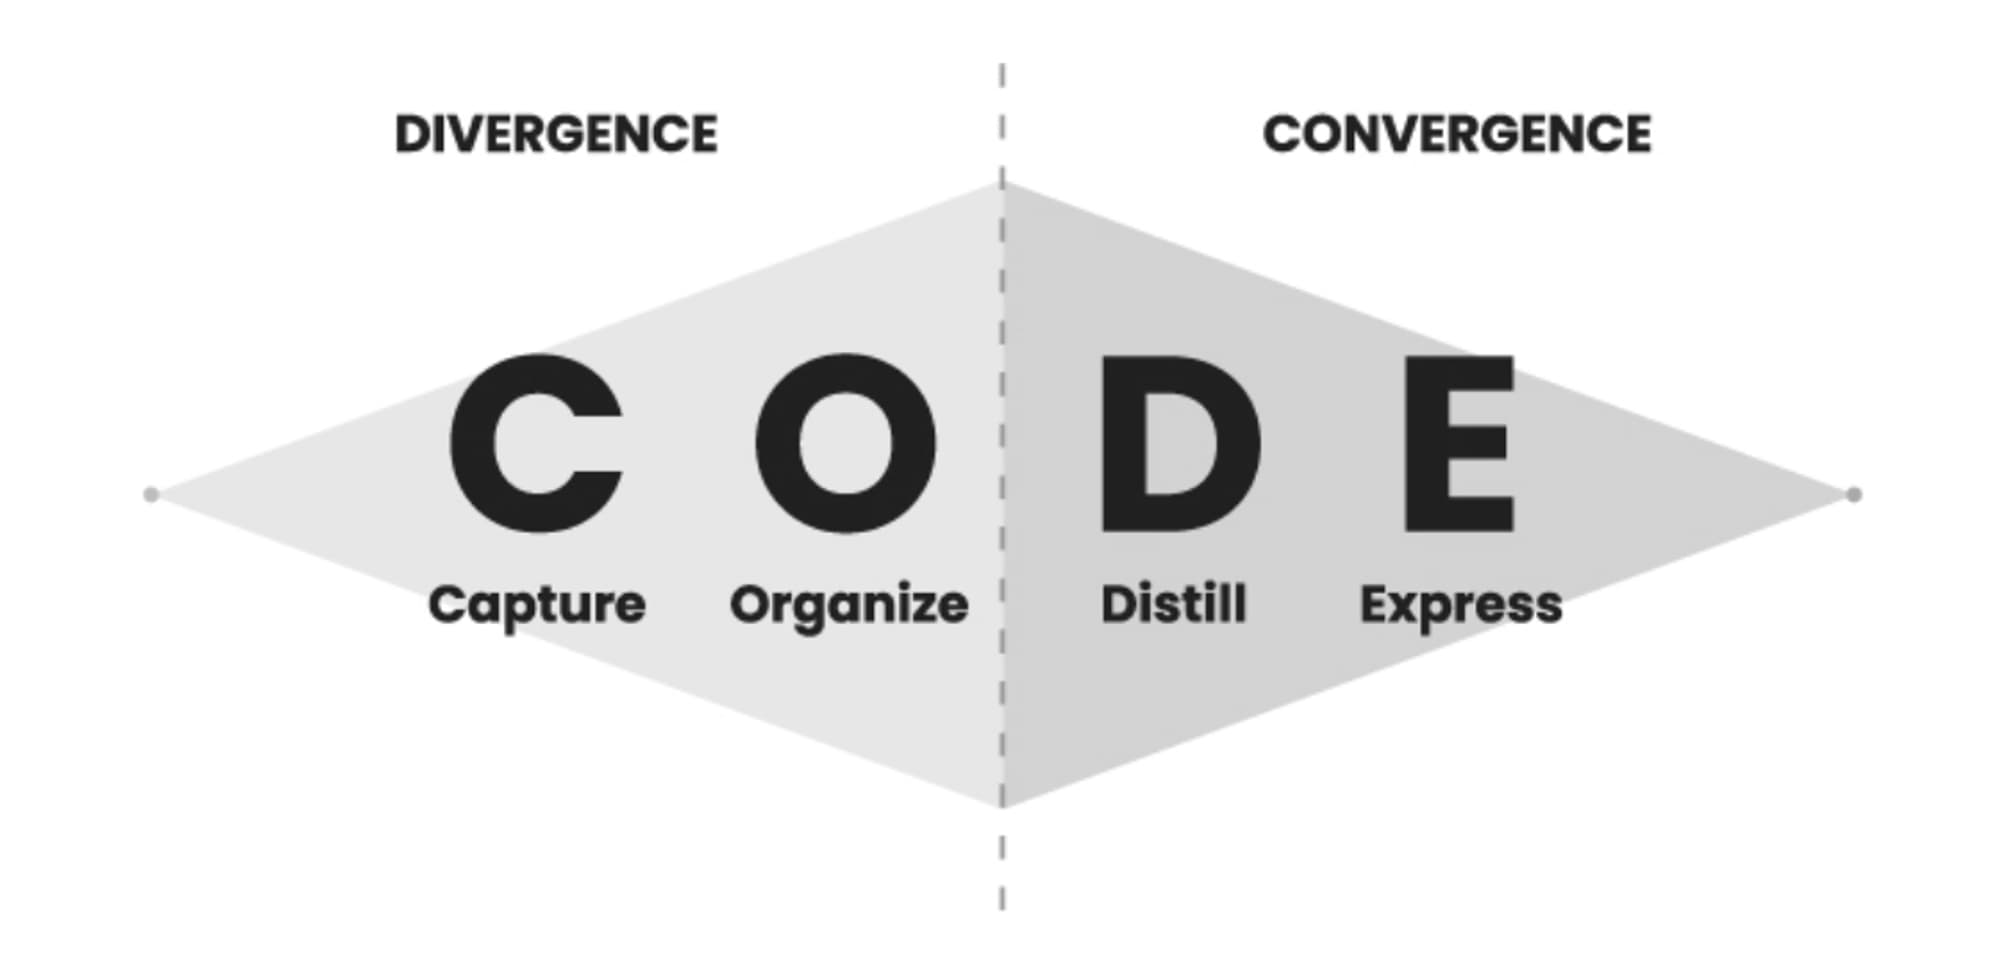 CODE stages